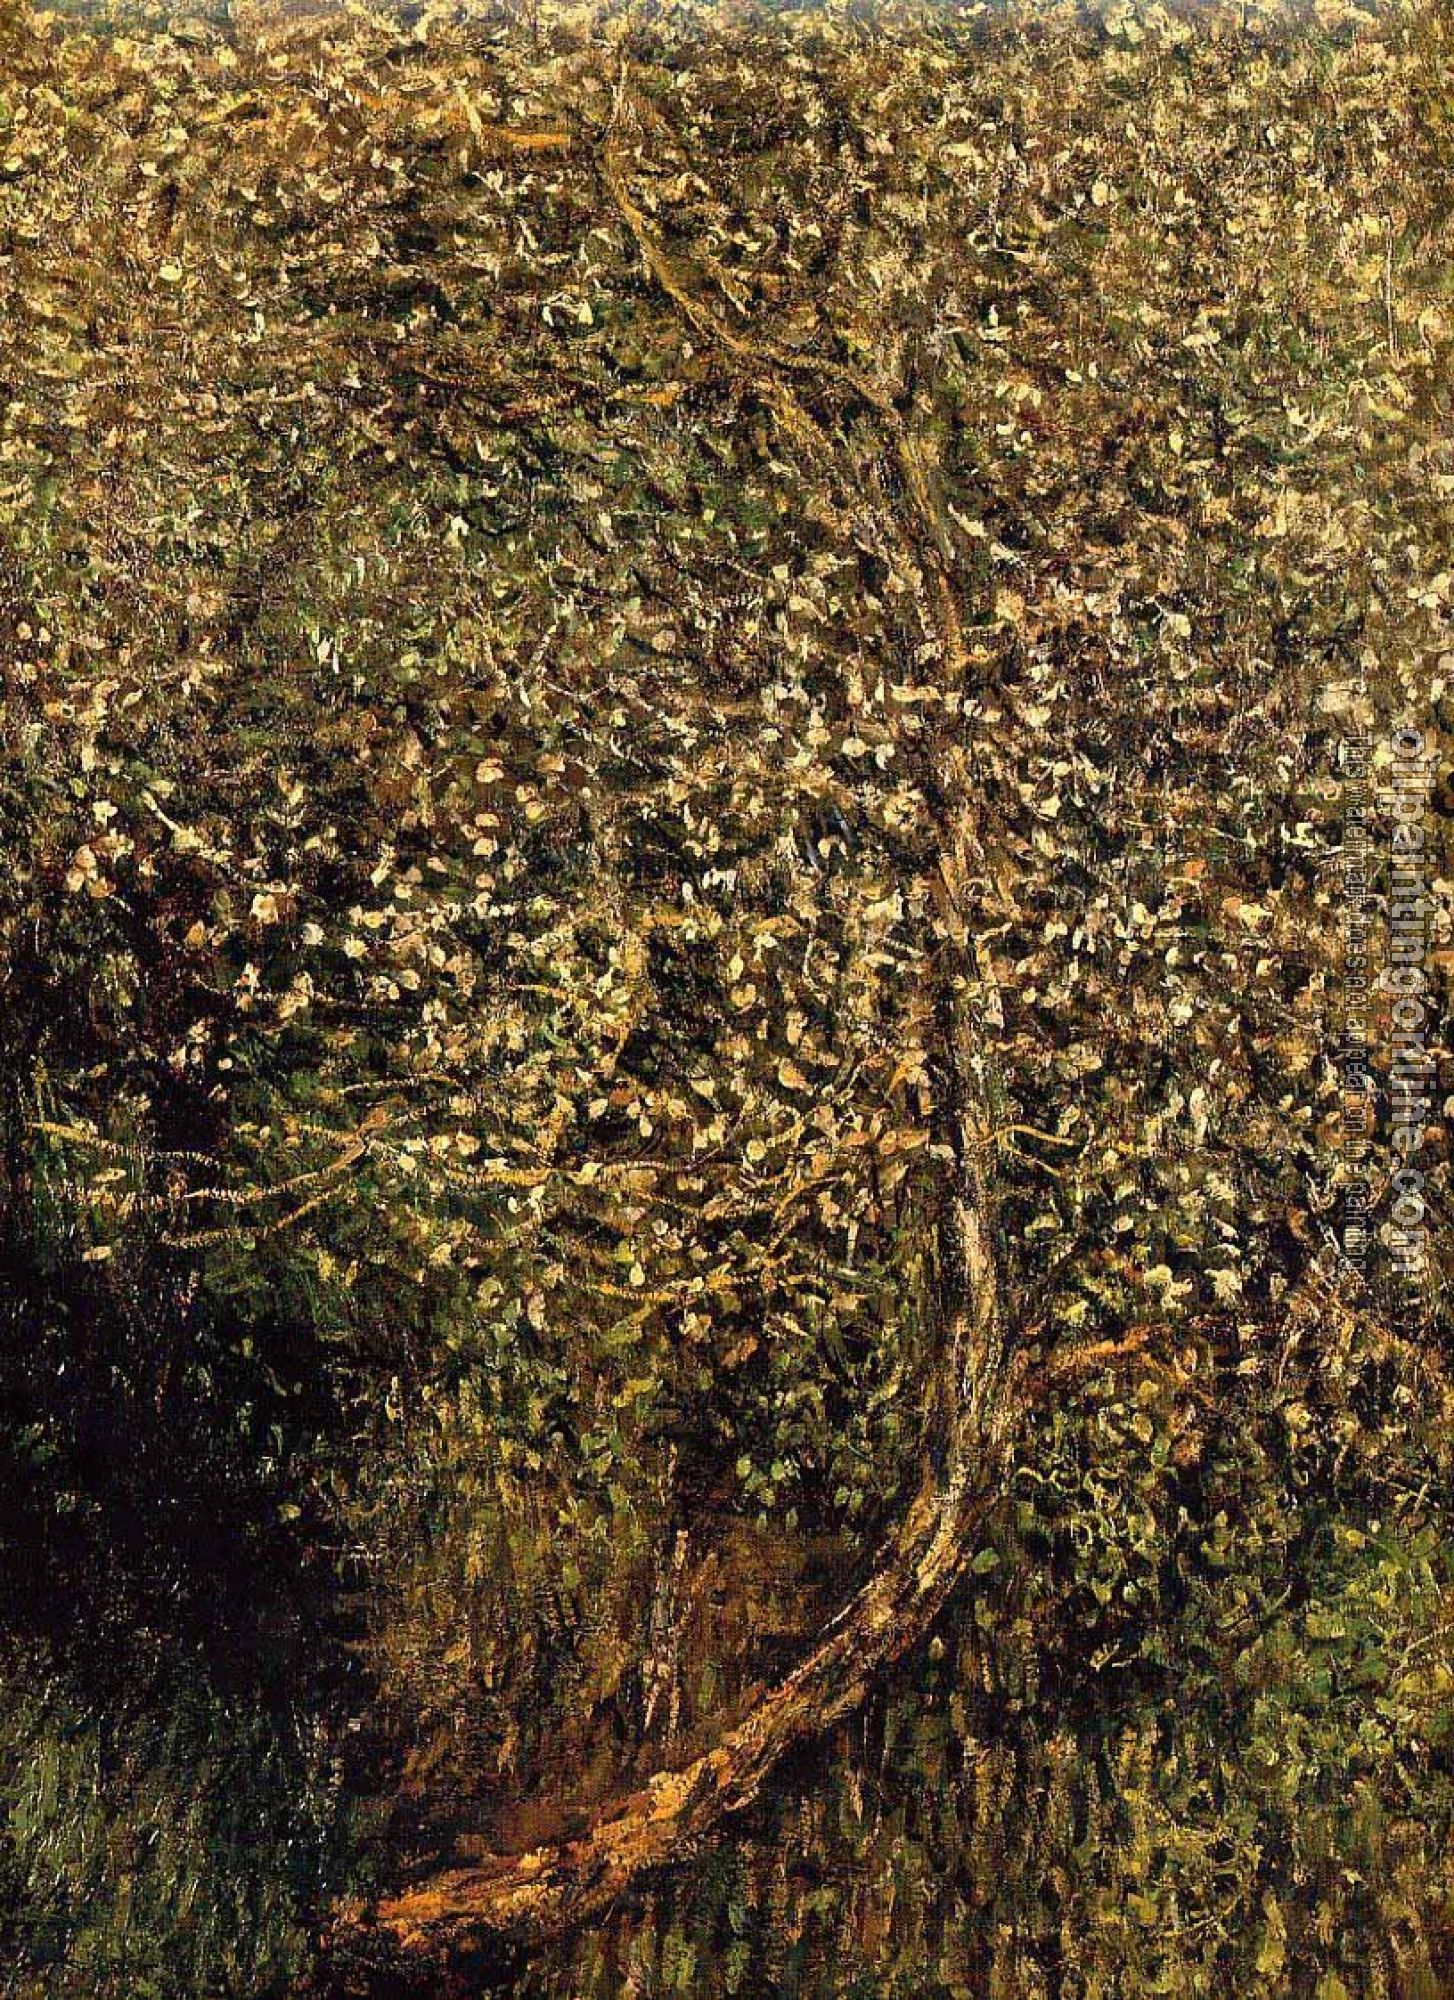 Monet, Claude Oscar - Apple Trees in Blossom by the Water